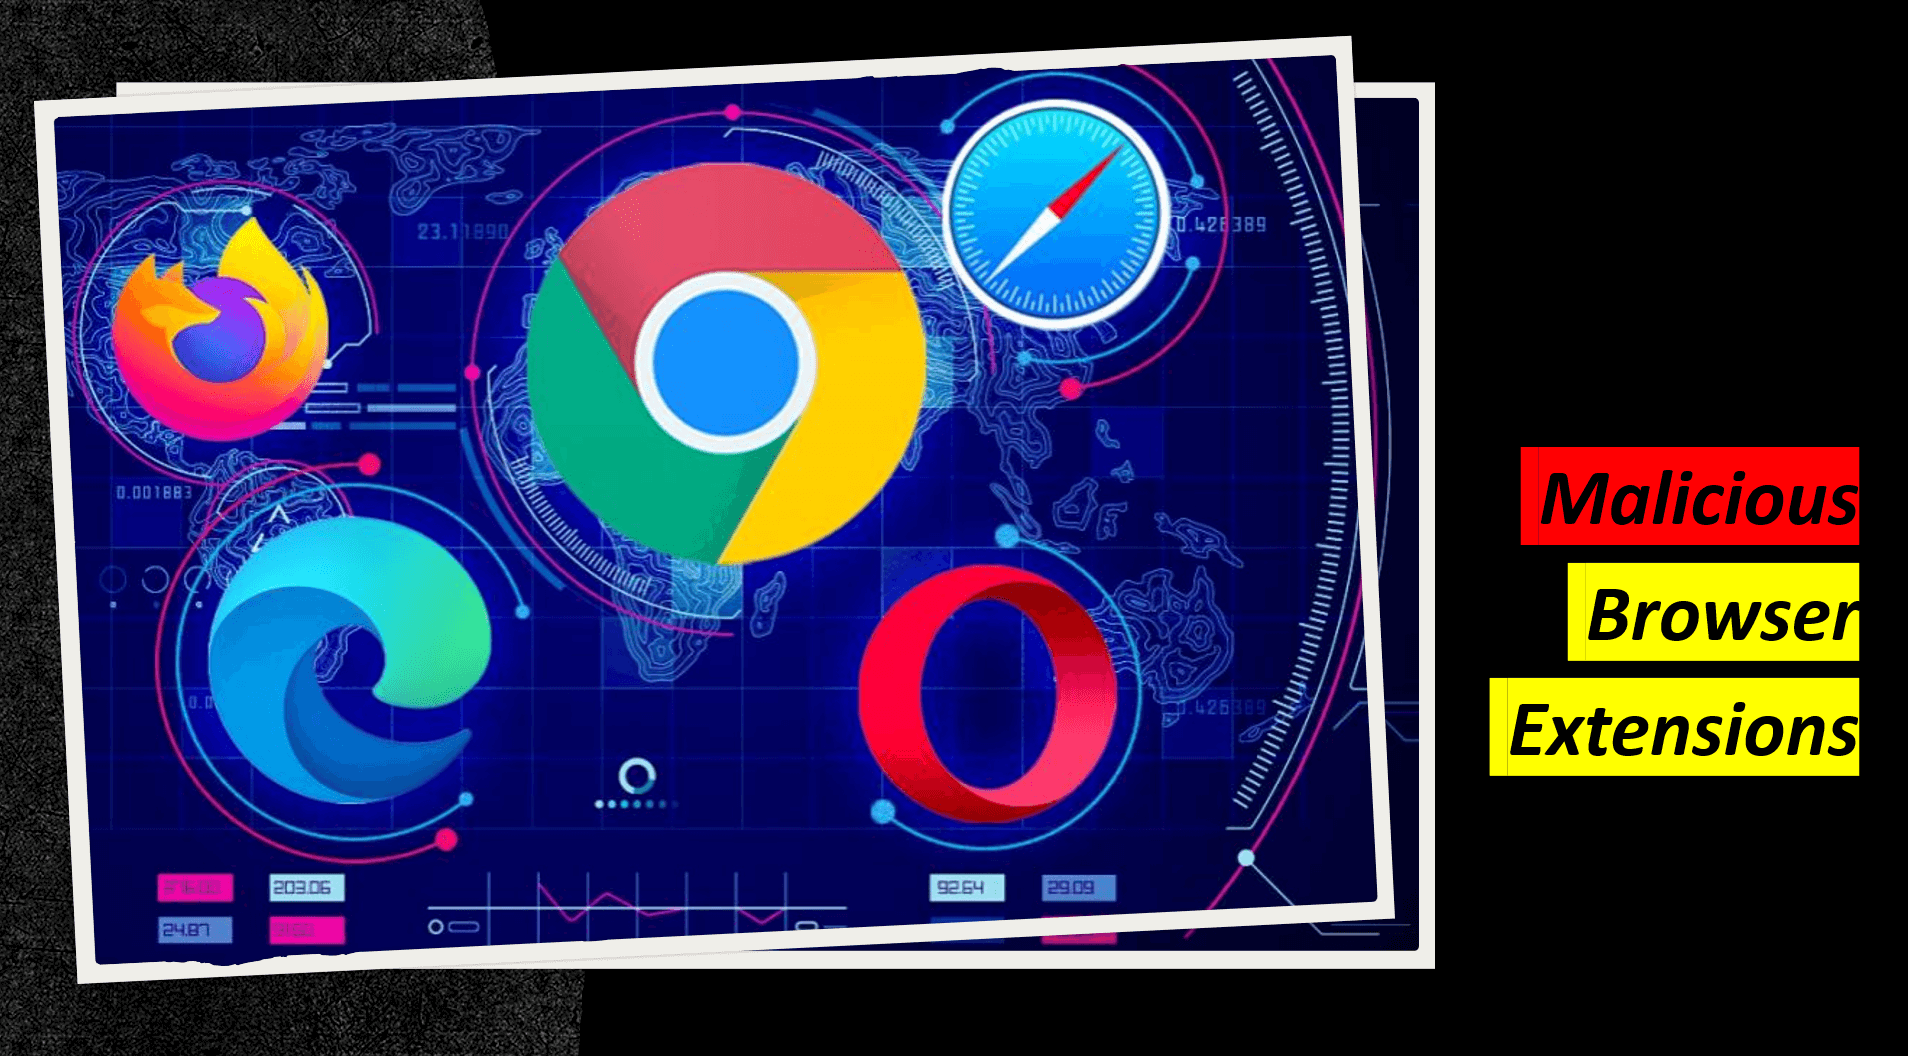 Malicious Browser Extensions